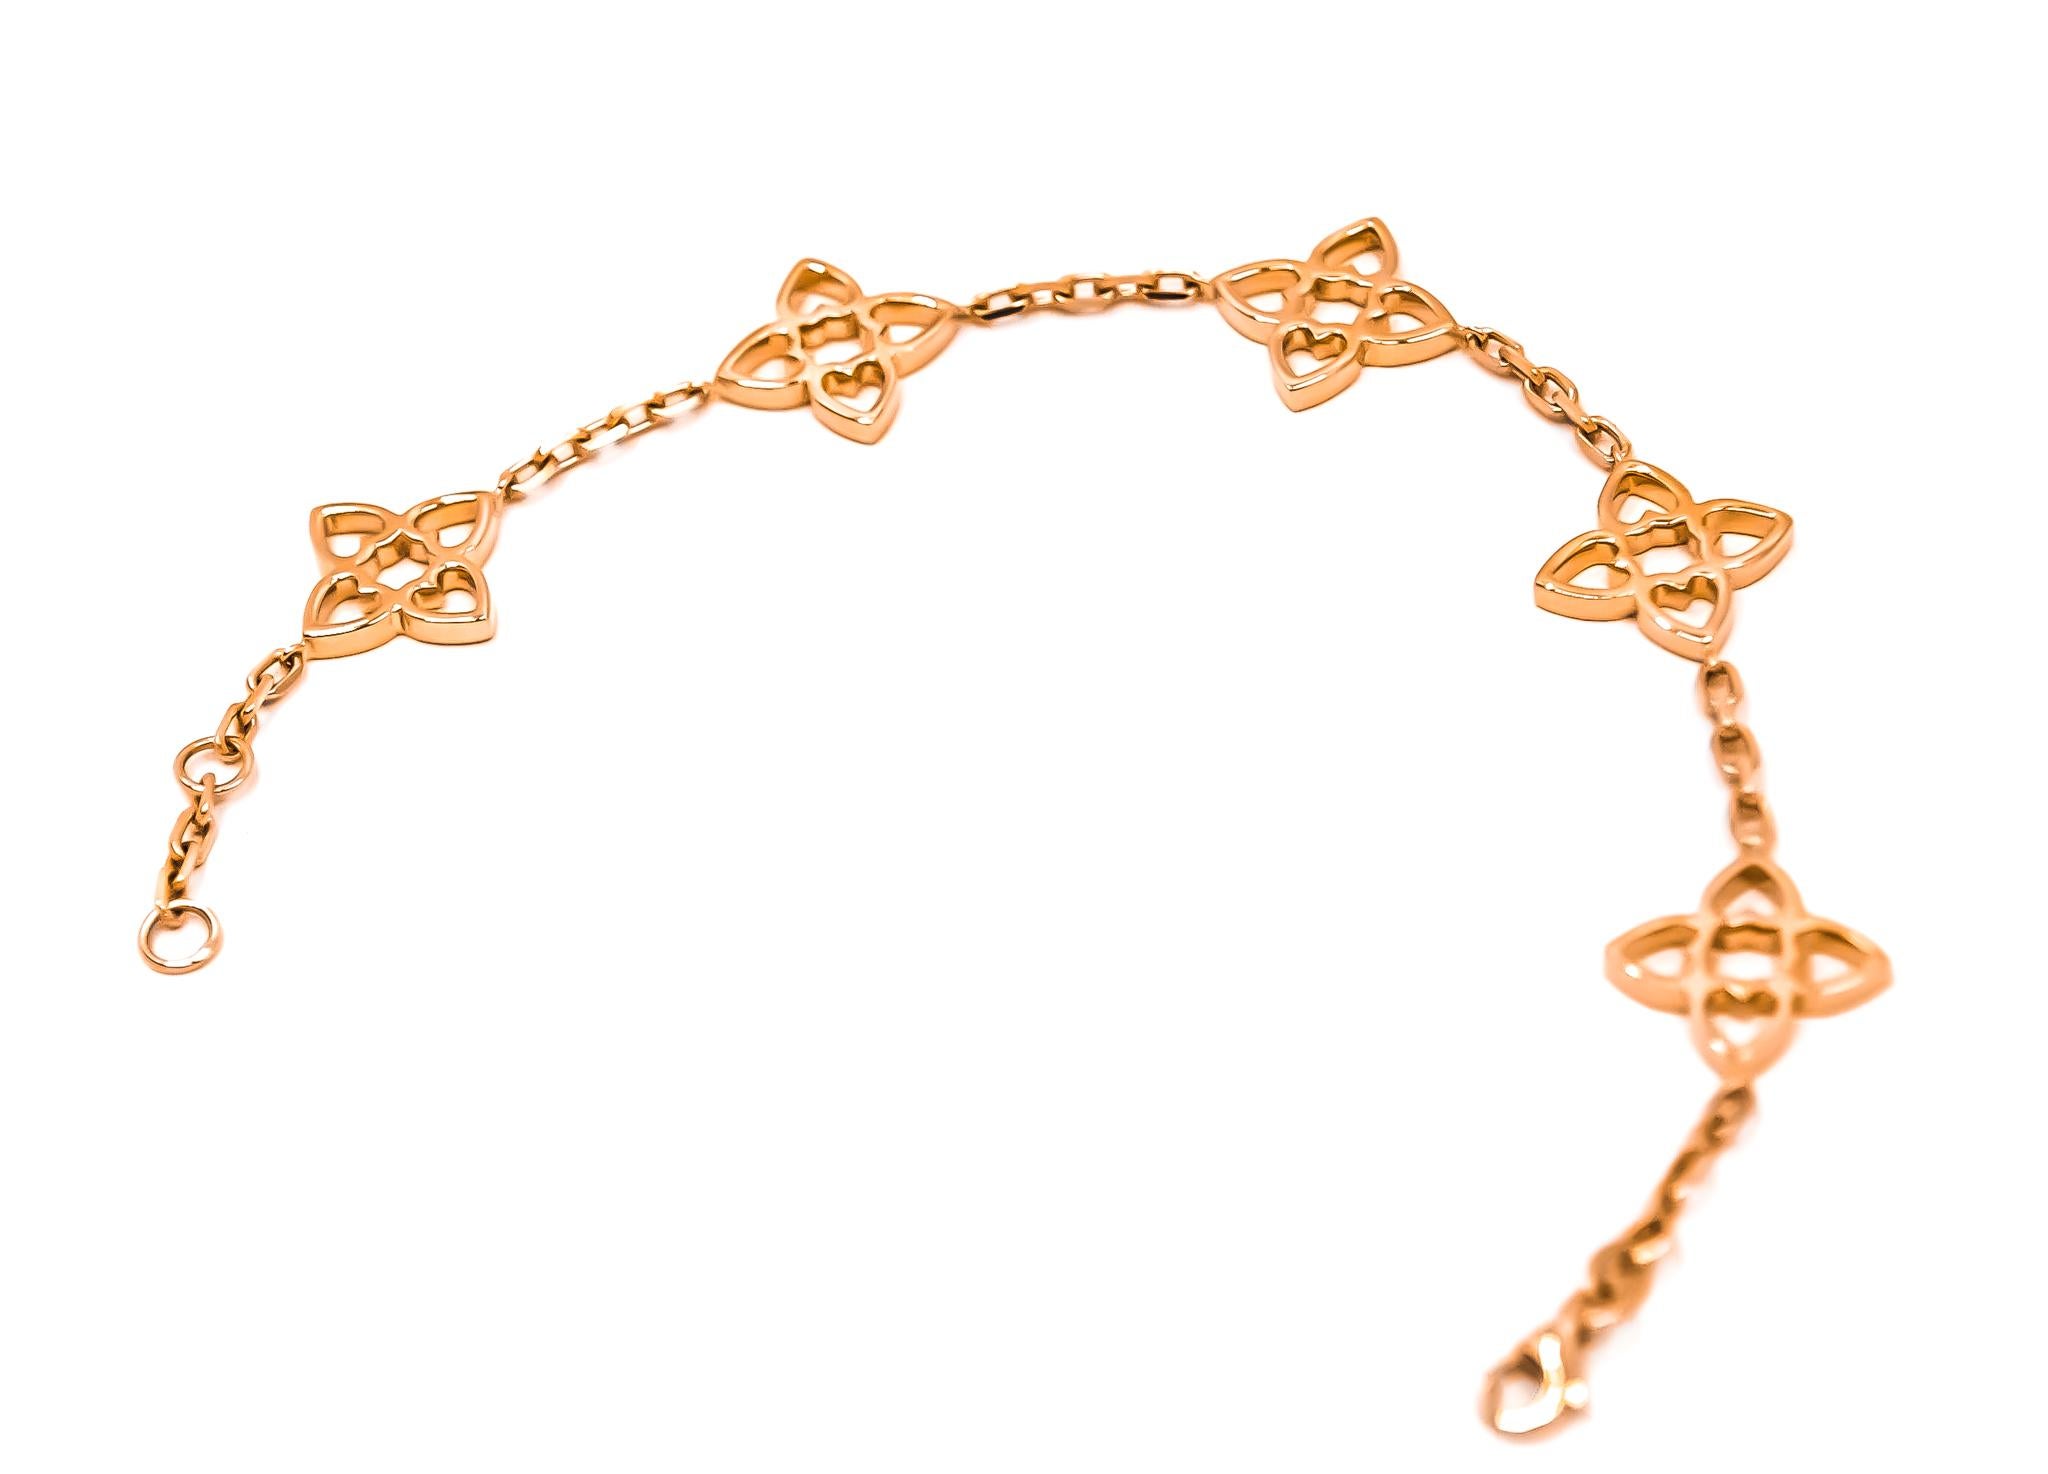 Connected Hearts Five Motif Bracelet in 18kt Rose Gold In New Condition For Sale In Dubai, AE